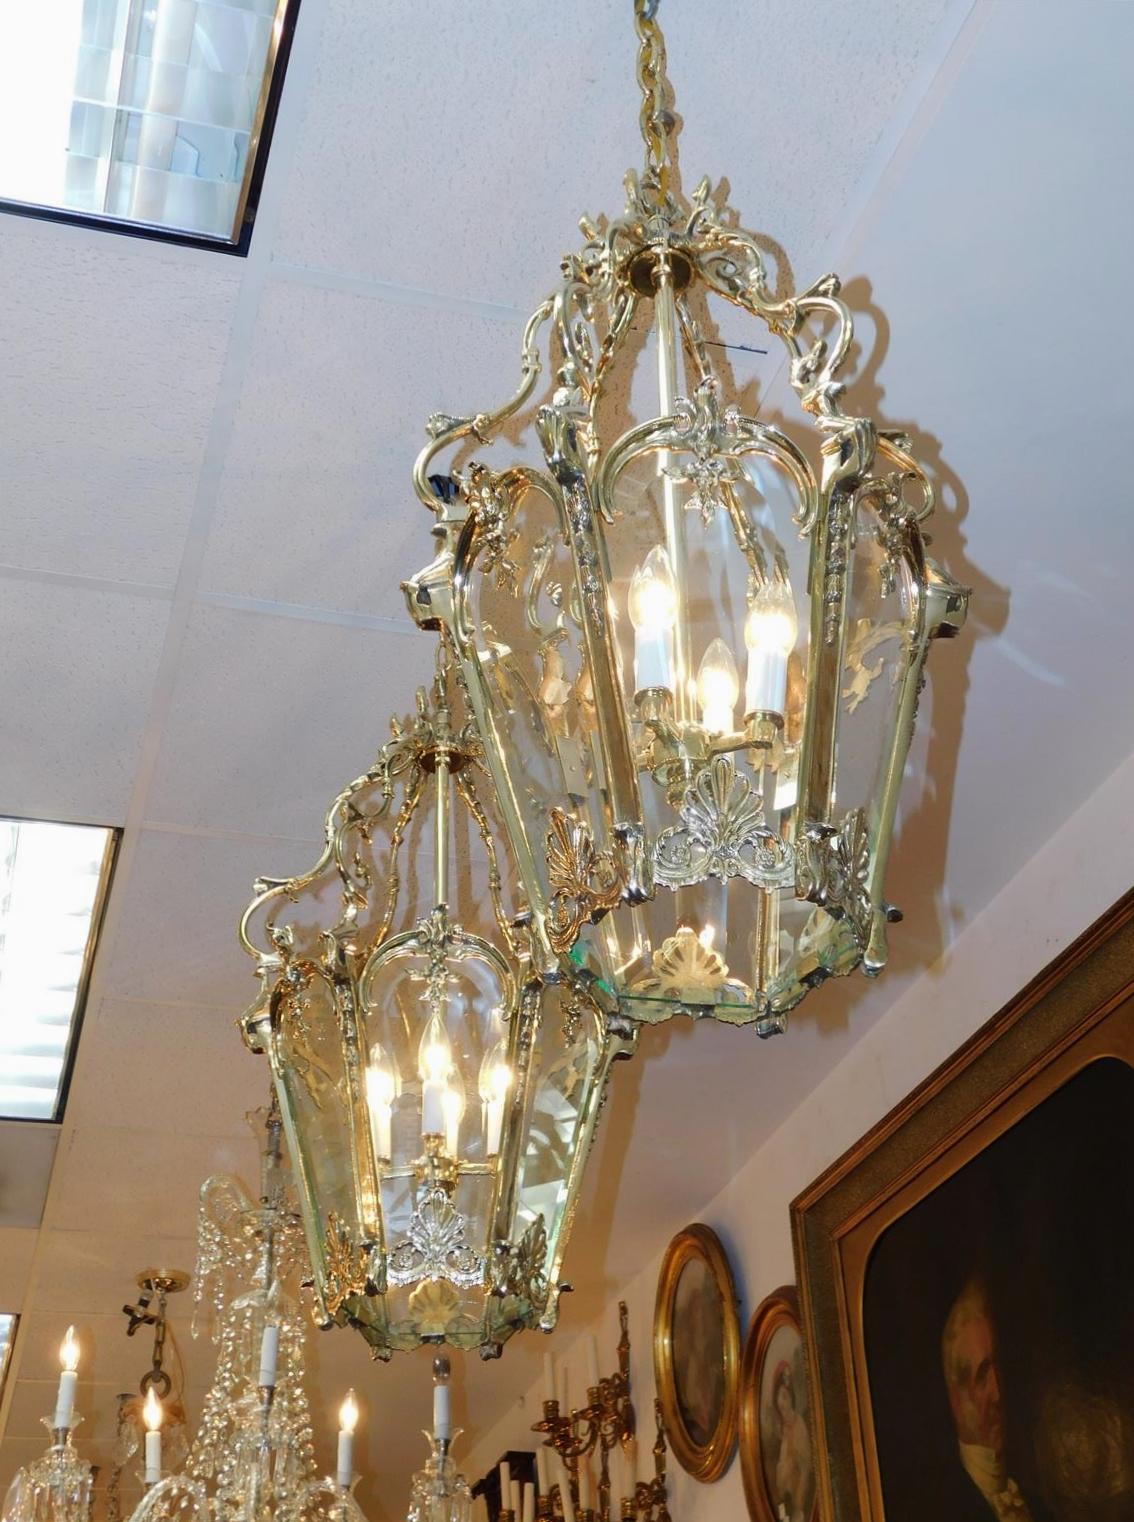 Pair of French brass hanging hall lanterns with decorative foliage scrolled frames, graduated bell flowers, shell accents, four light interior clusters, and retains the original six paneled beveled glass. Originally candle powered and have been